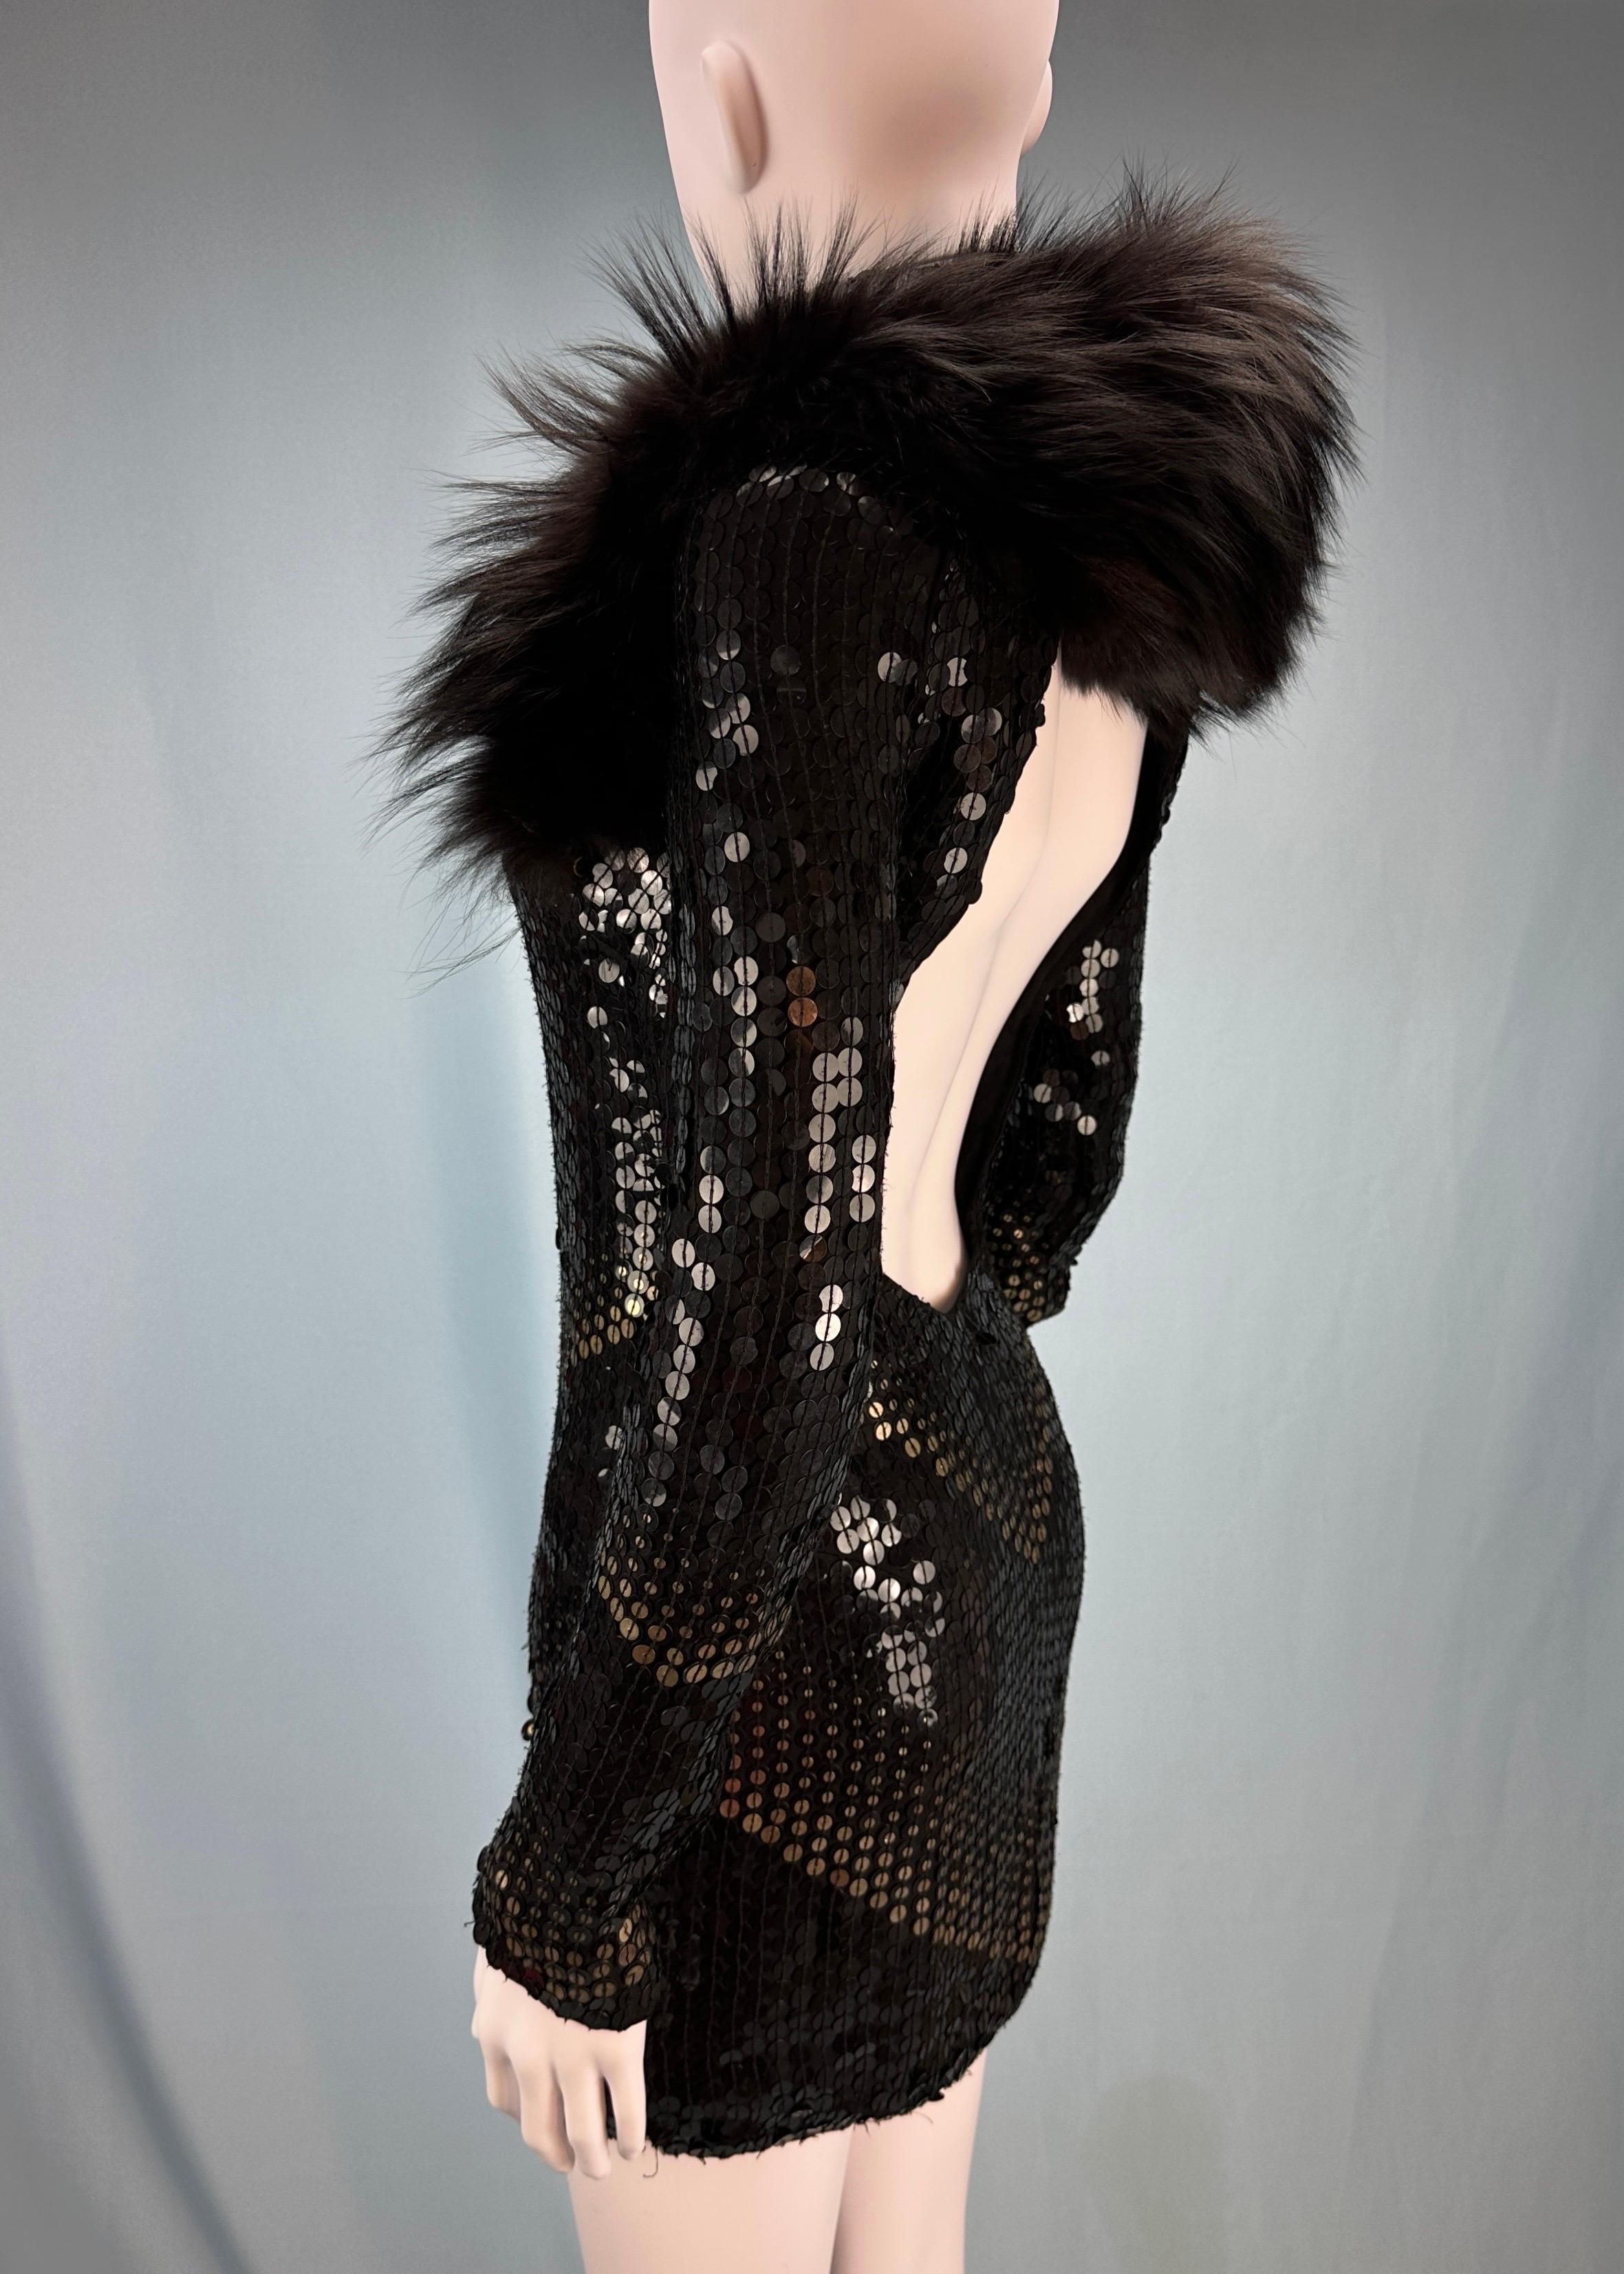 Gucci
by Frida Giannini
Fall 2006 - seen on the runway & in an editorial on Kate Moss 

Black and gold sequin mini dress with fox fur detail
Open back
Removable fox fur scarf, can be worn over the shoulders or neck
Zips on sleeve cuffs 
Zip up